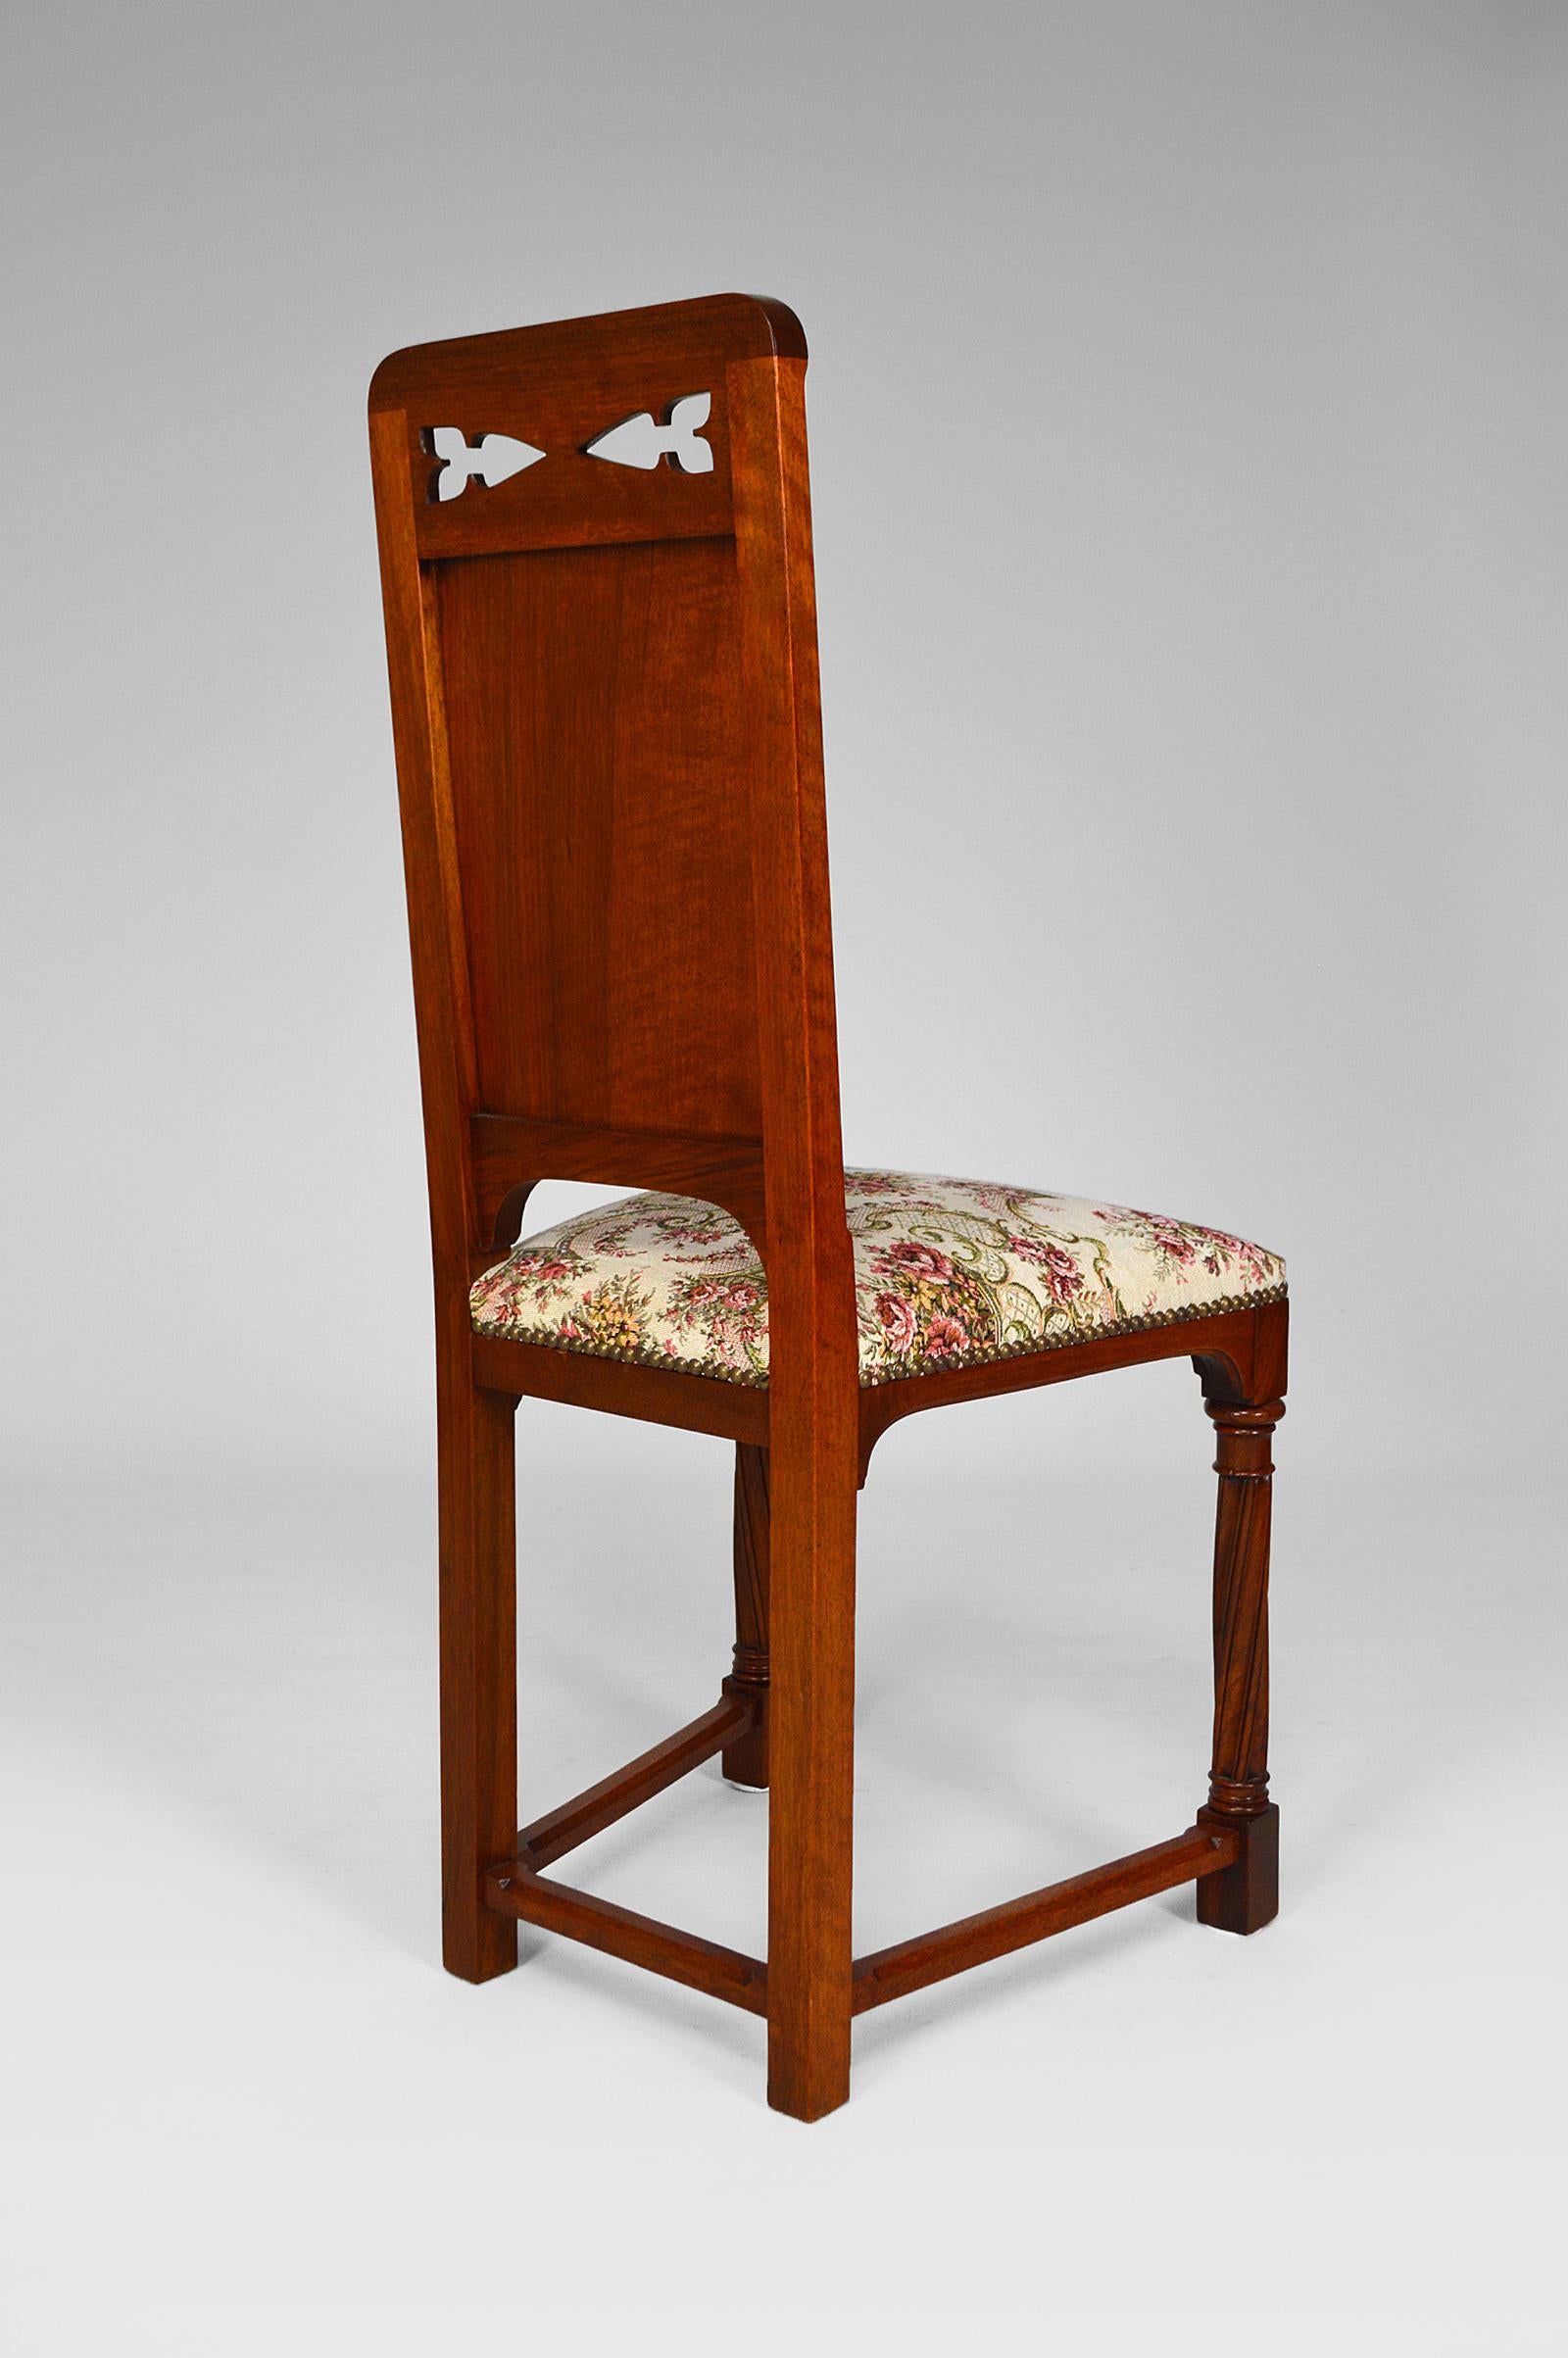 Pair of Antique Victorian Gothic Revival Chairs in Carved Walnut, 19th Century For Sale 5